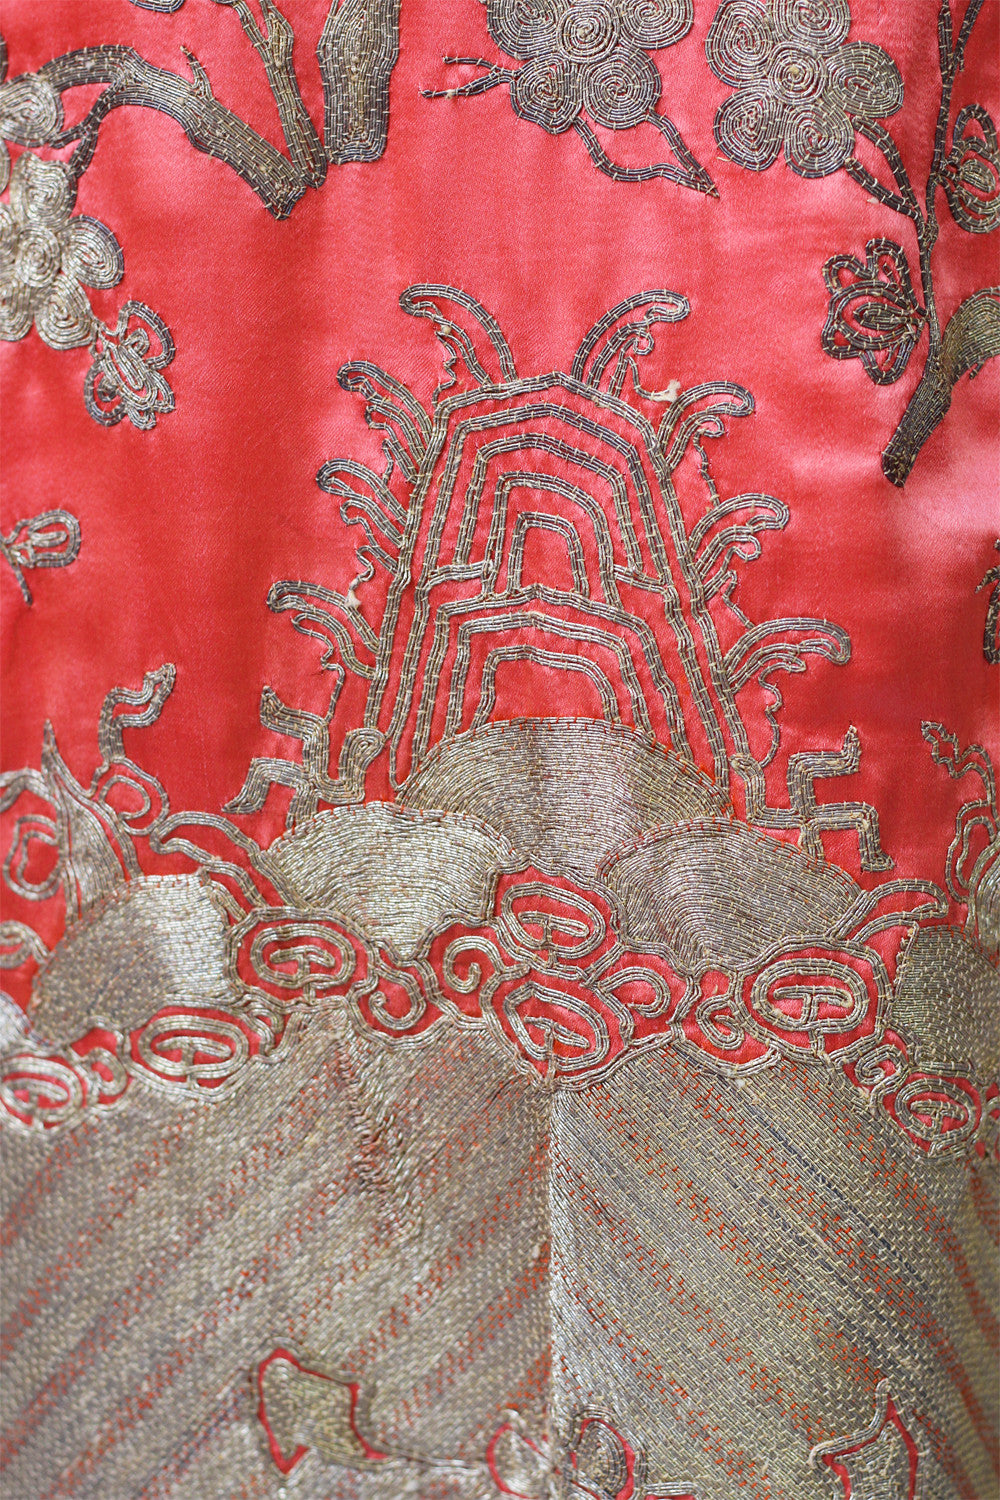 1920s Heavily Embroidered Coral Satin Metallic Chinese Robe